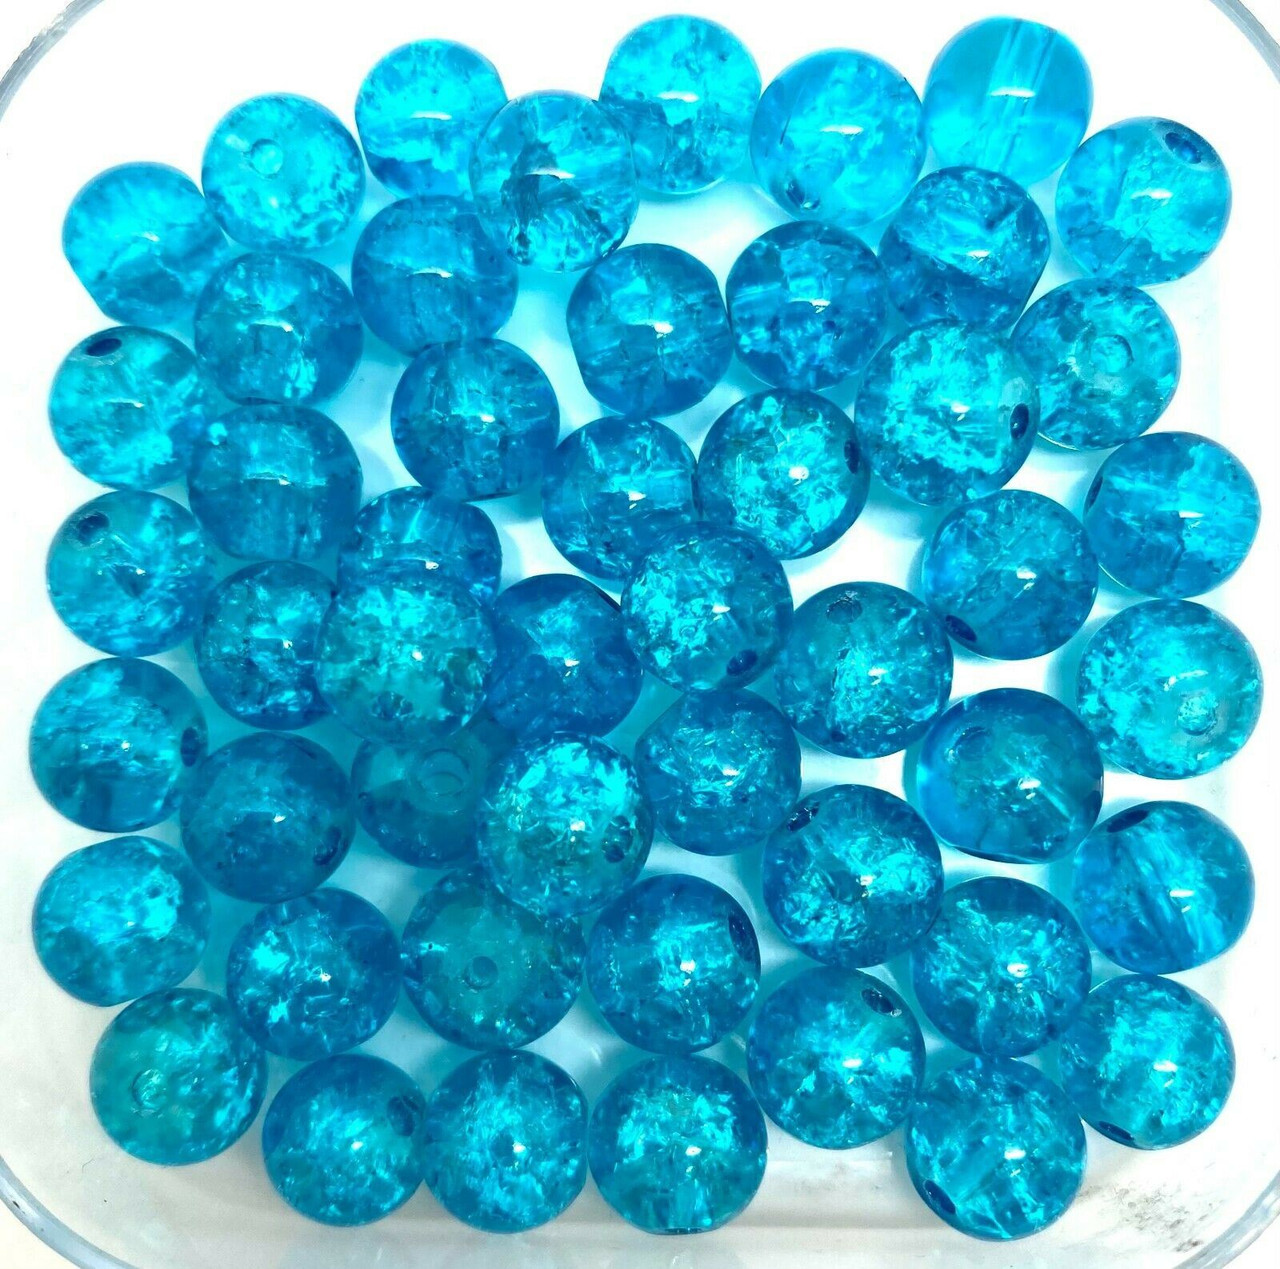 10mm Crackle Glass Beads - Turquoise, 40 beads